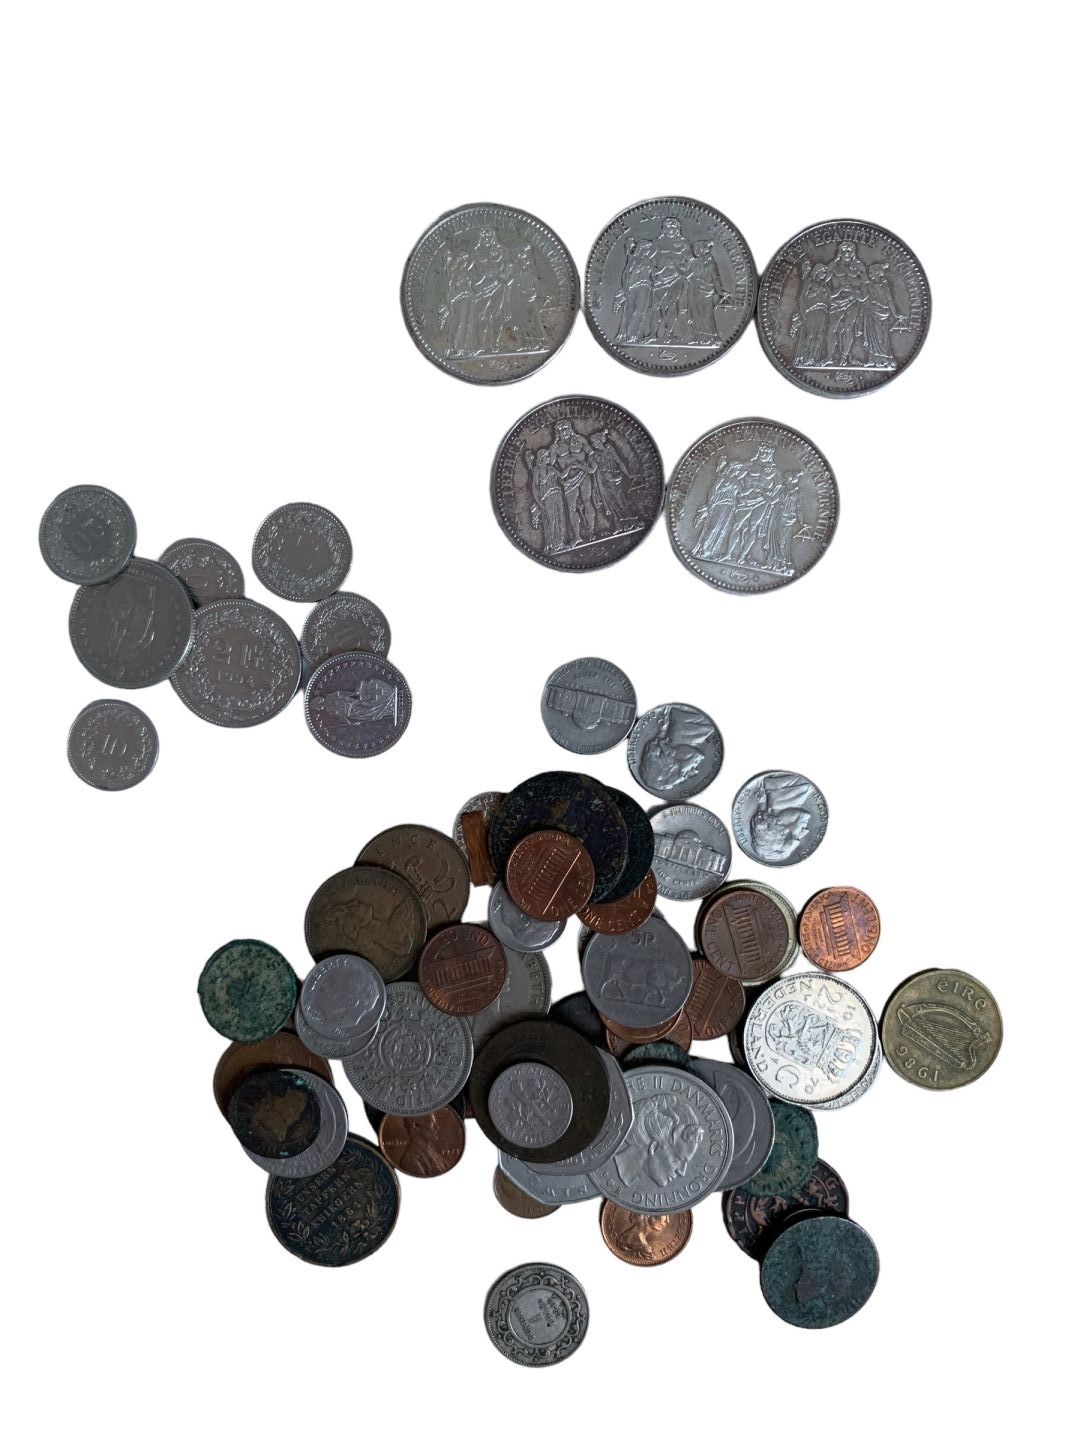 Null *FIVE 10-franc silver PIECES, Weight: 125.26 g.
A lot of old coins is attac&hellip;